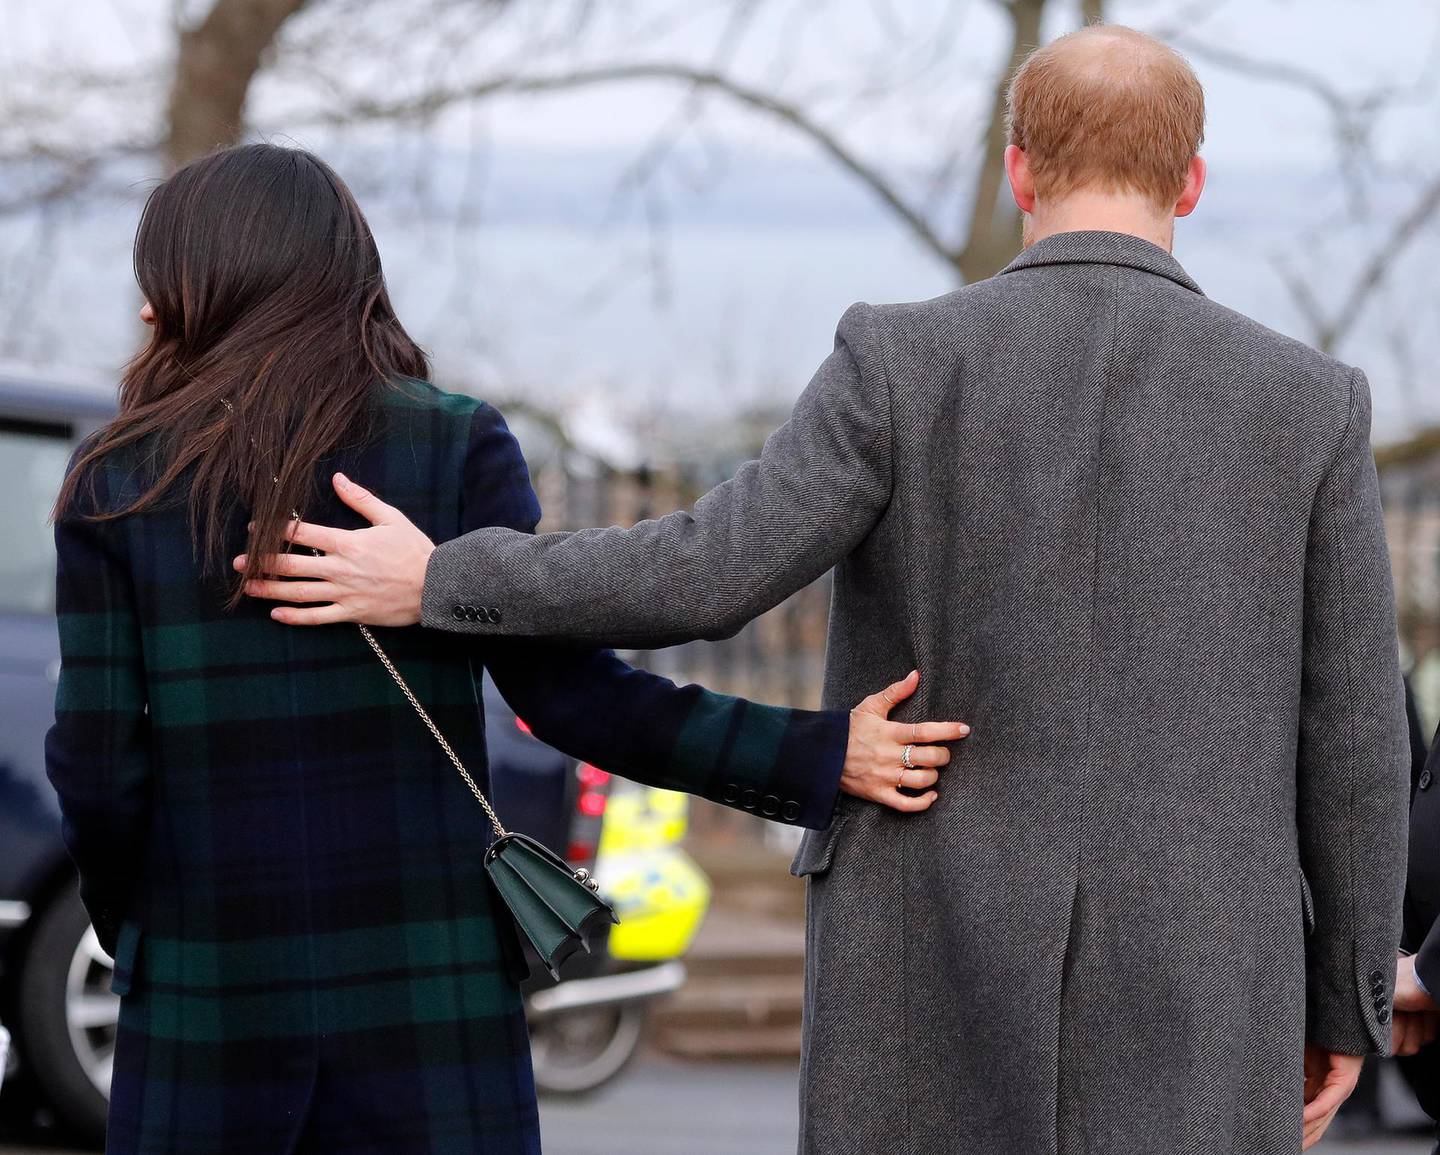 FILE - In this file photo Britain's Prince Harry and his fiancee Meghan Markle arrive at Edinburgh Castle in Edinburgh, Scotland. In a stunning declaration, Britain's Prince Harry and his wife, Meghan, said they are planning "to step back" as senior members of the royal family and "work to become financially independent." A statement issued by the couple Wednesday, Jan. 8, 2020 also said they intend to "balance" their time between the U.K. and North America. (AP Photo/Frank Augstein, File)